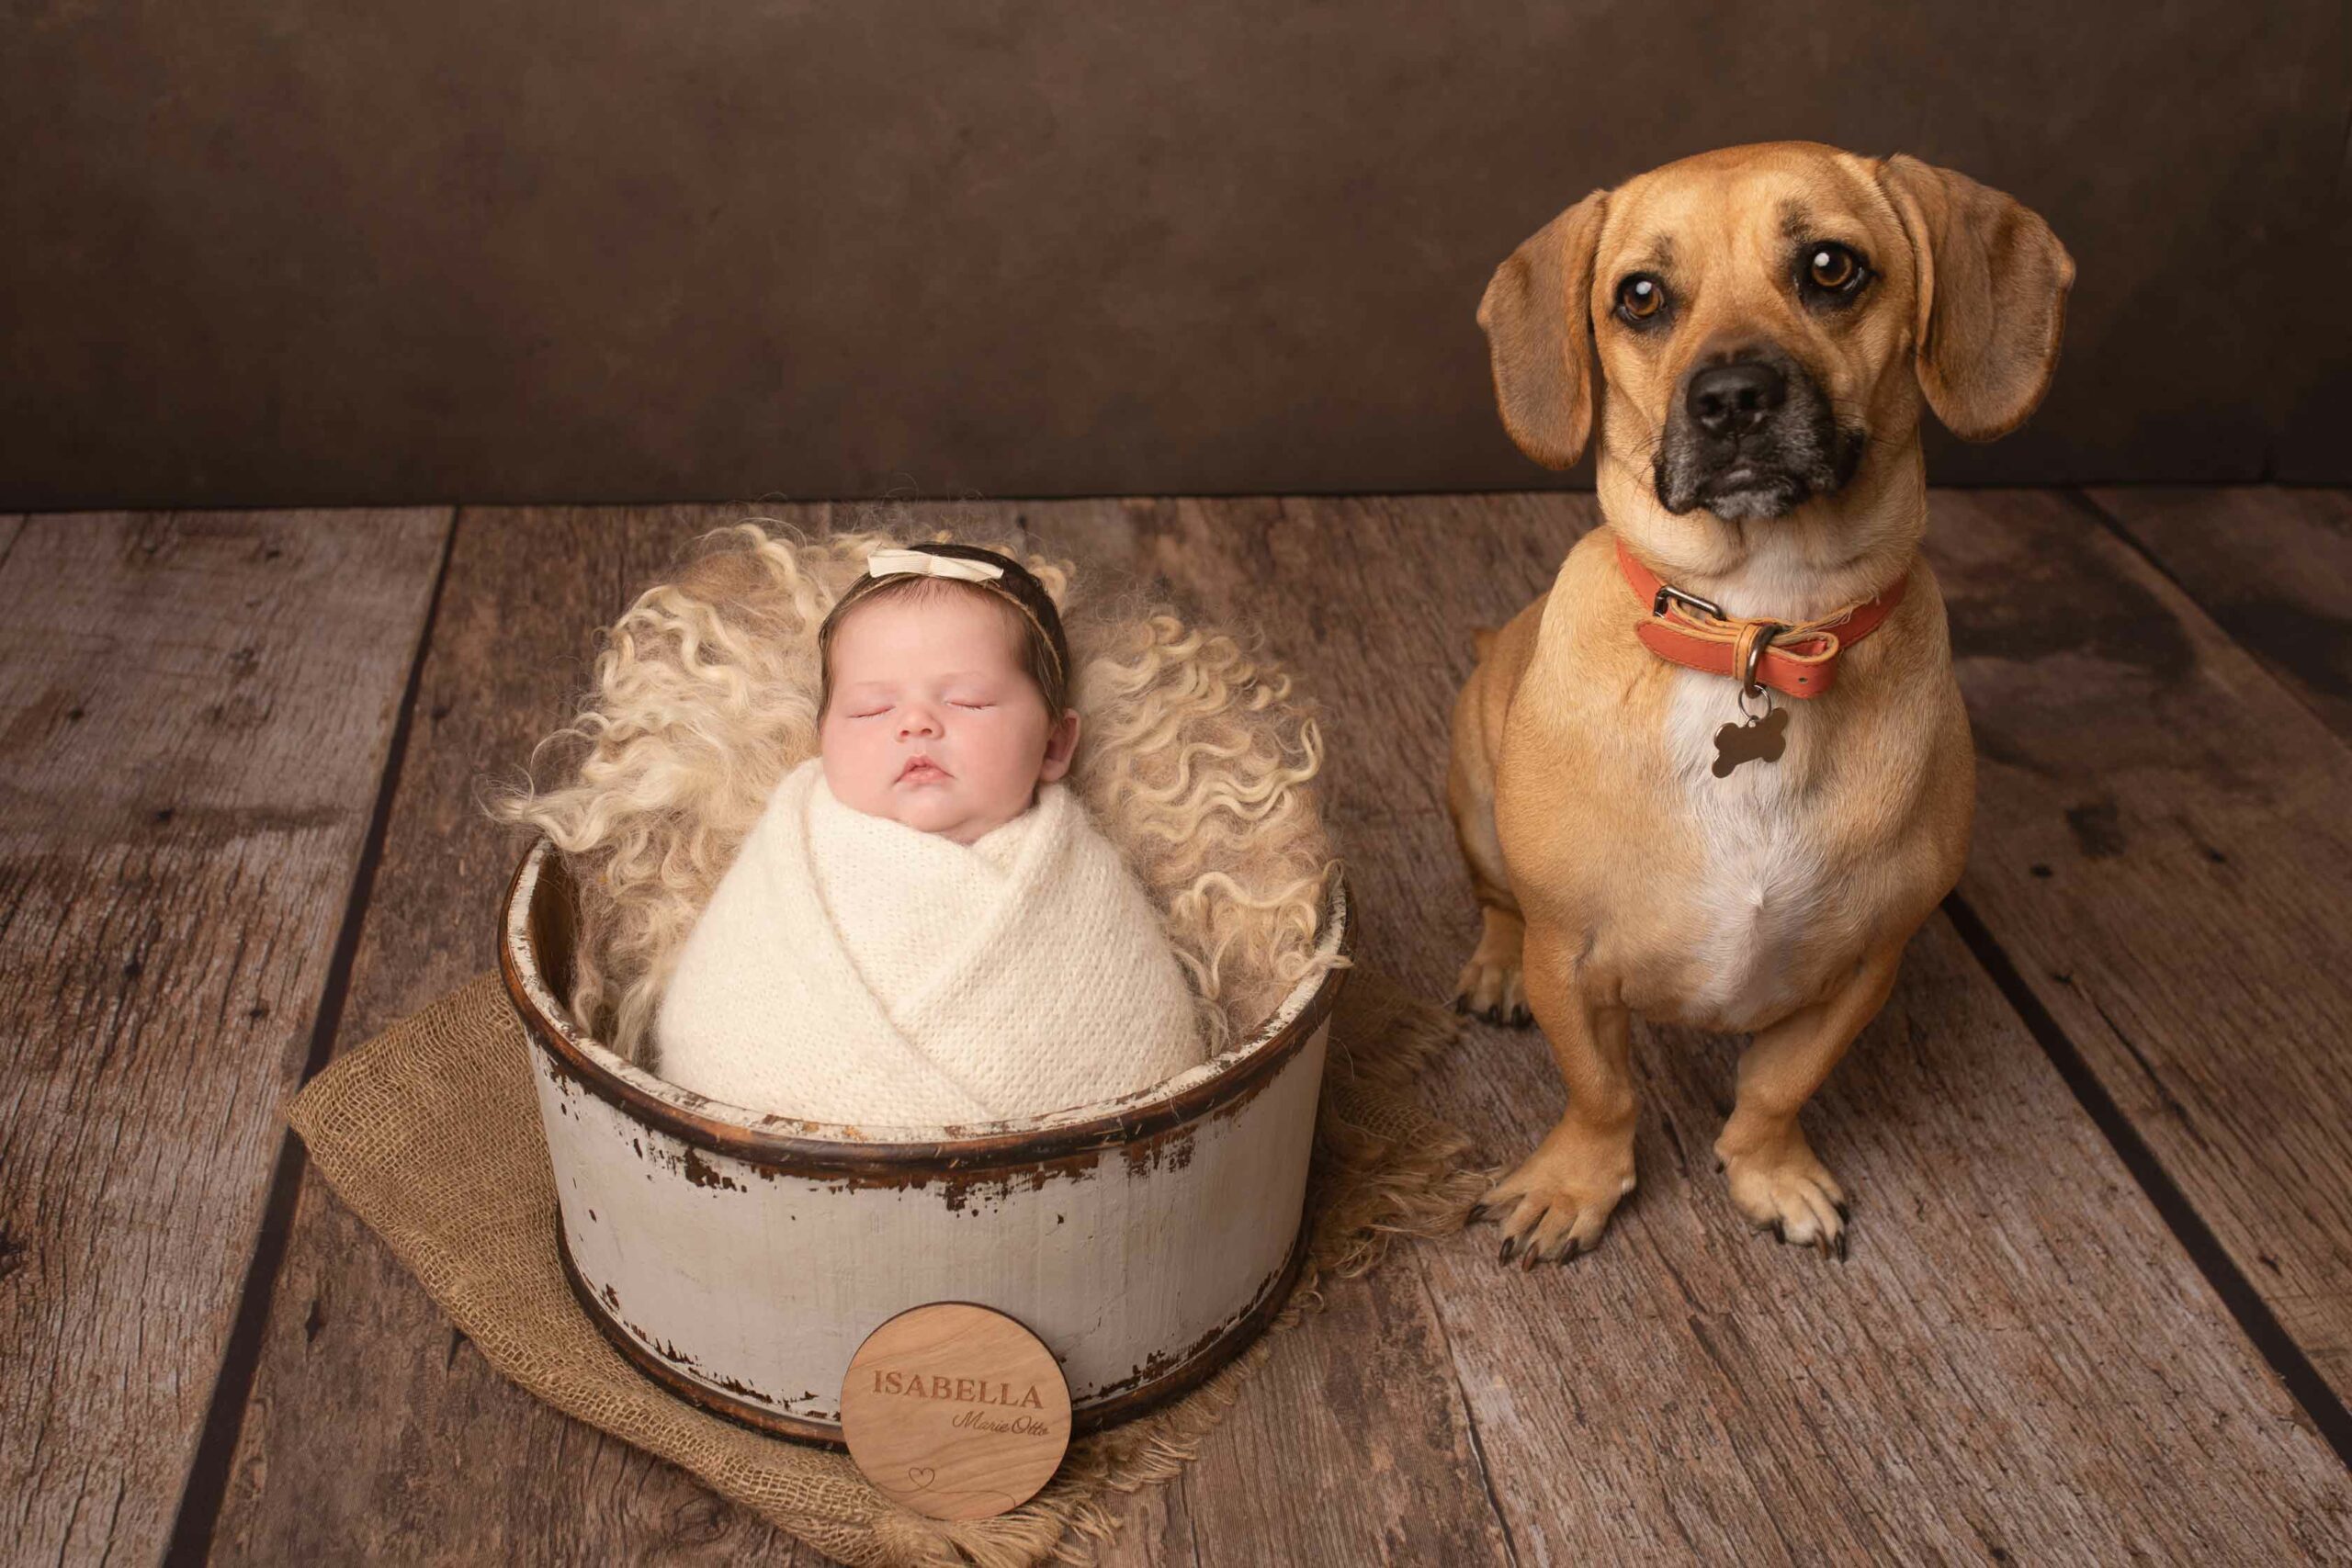 Baby girl in wooden prop photographed next to her dog on wooden backdrop. Hannah Cornford Photography based in Medway Kent